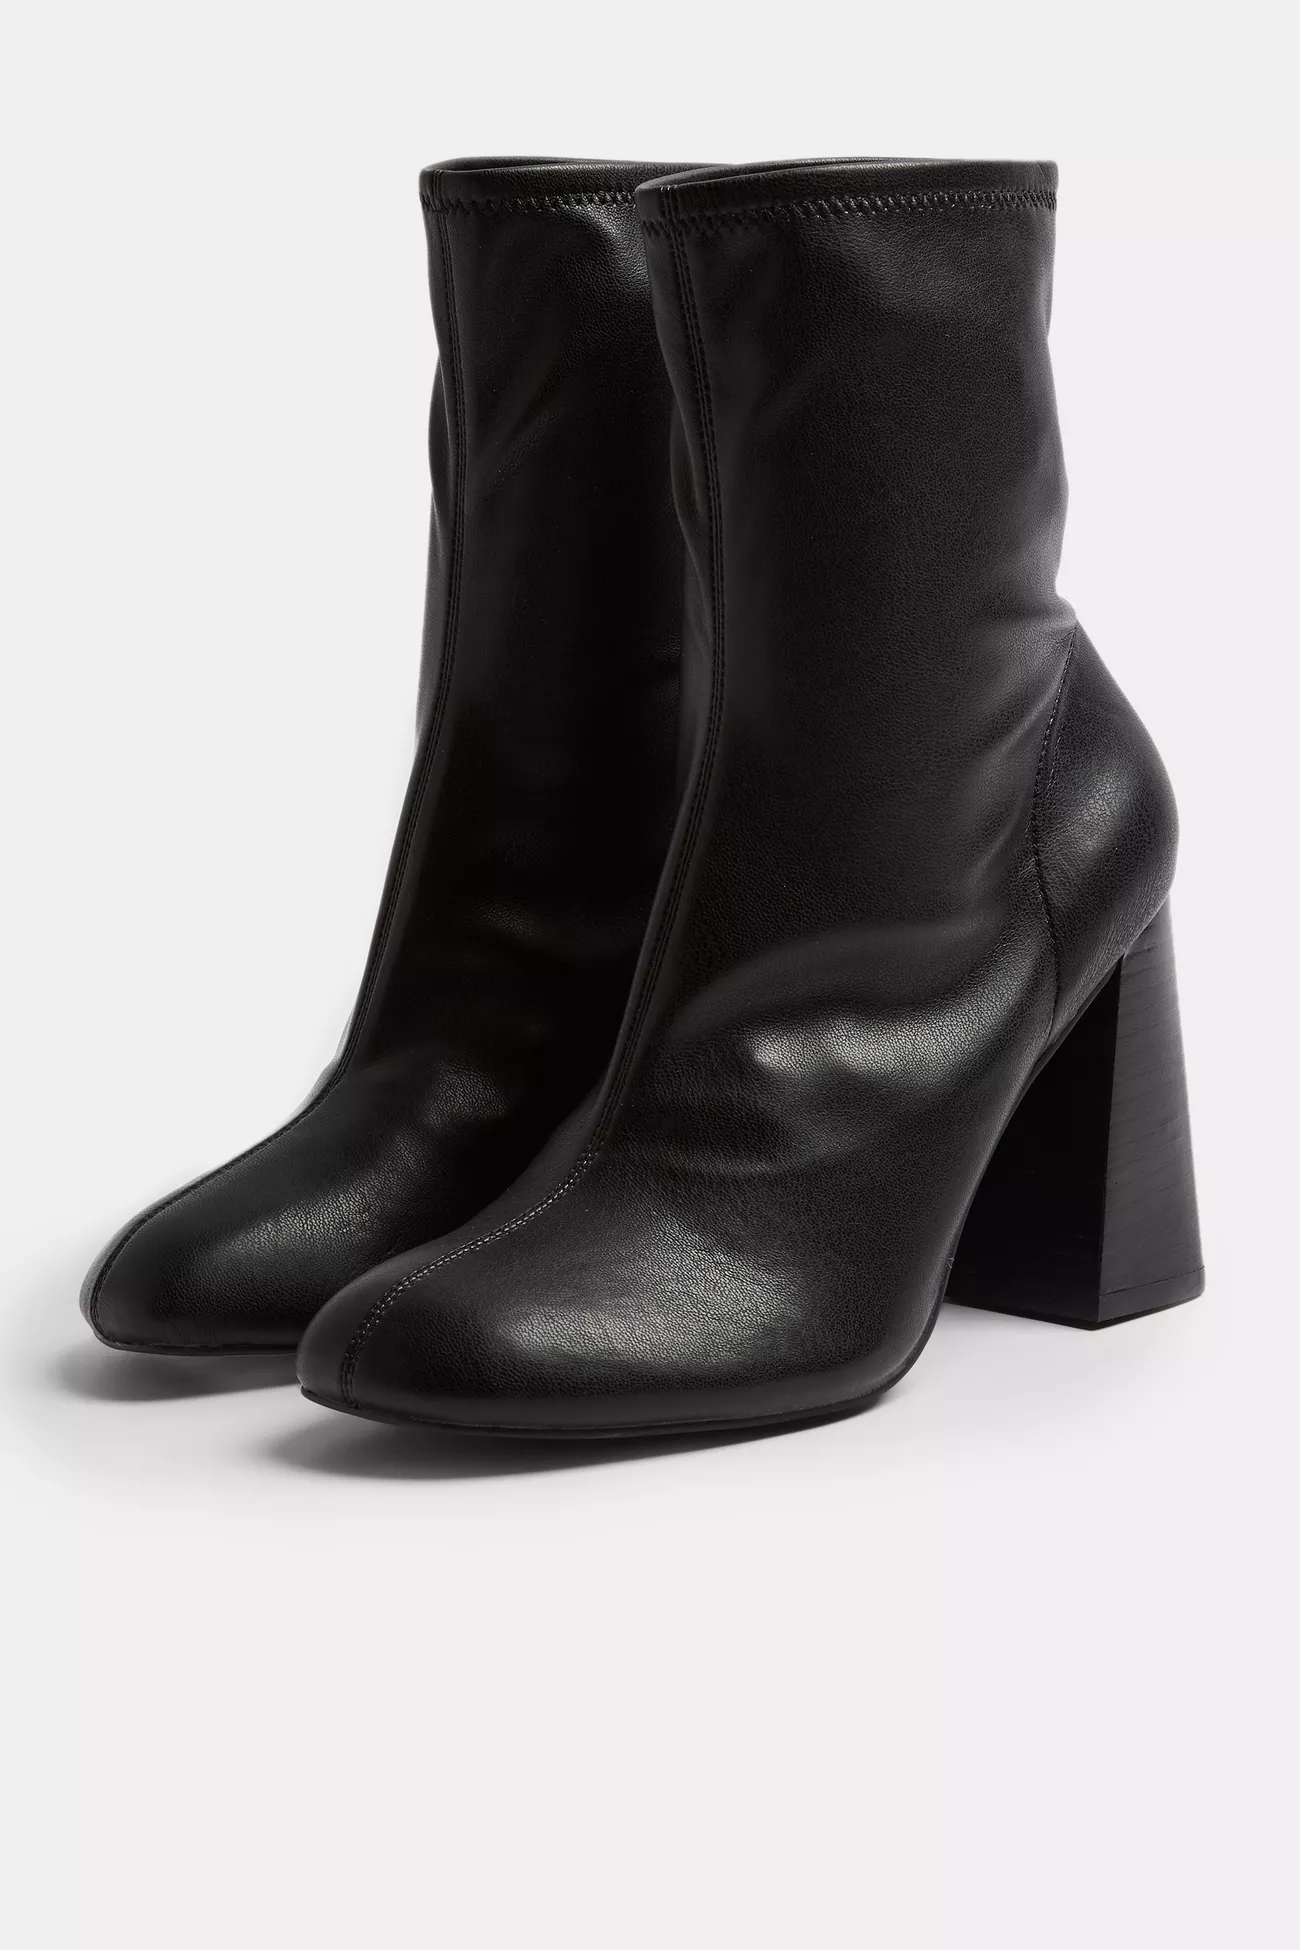 Topshop + Brody Stretch Boot